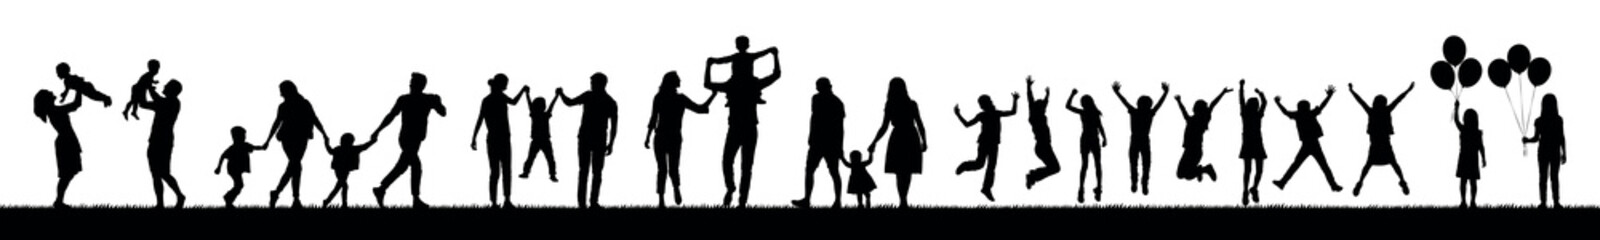 Silhouettes set of group people adult and kids outdoor activities vector.
